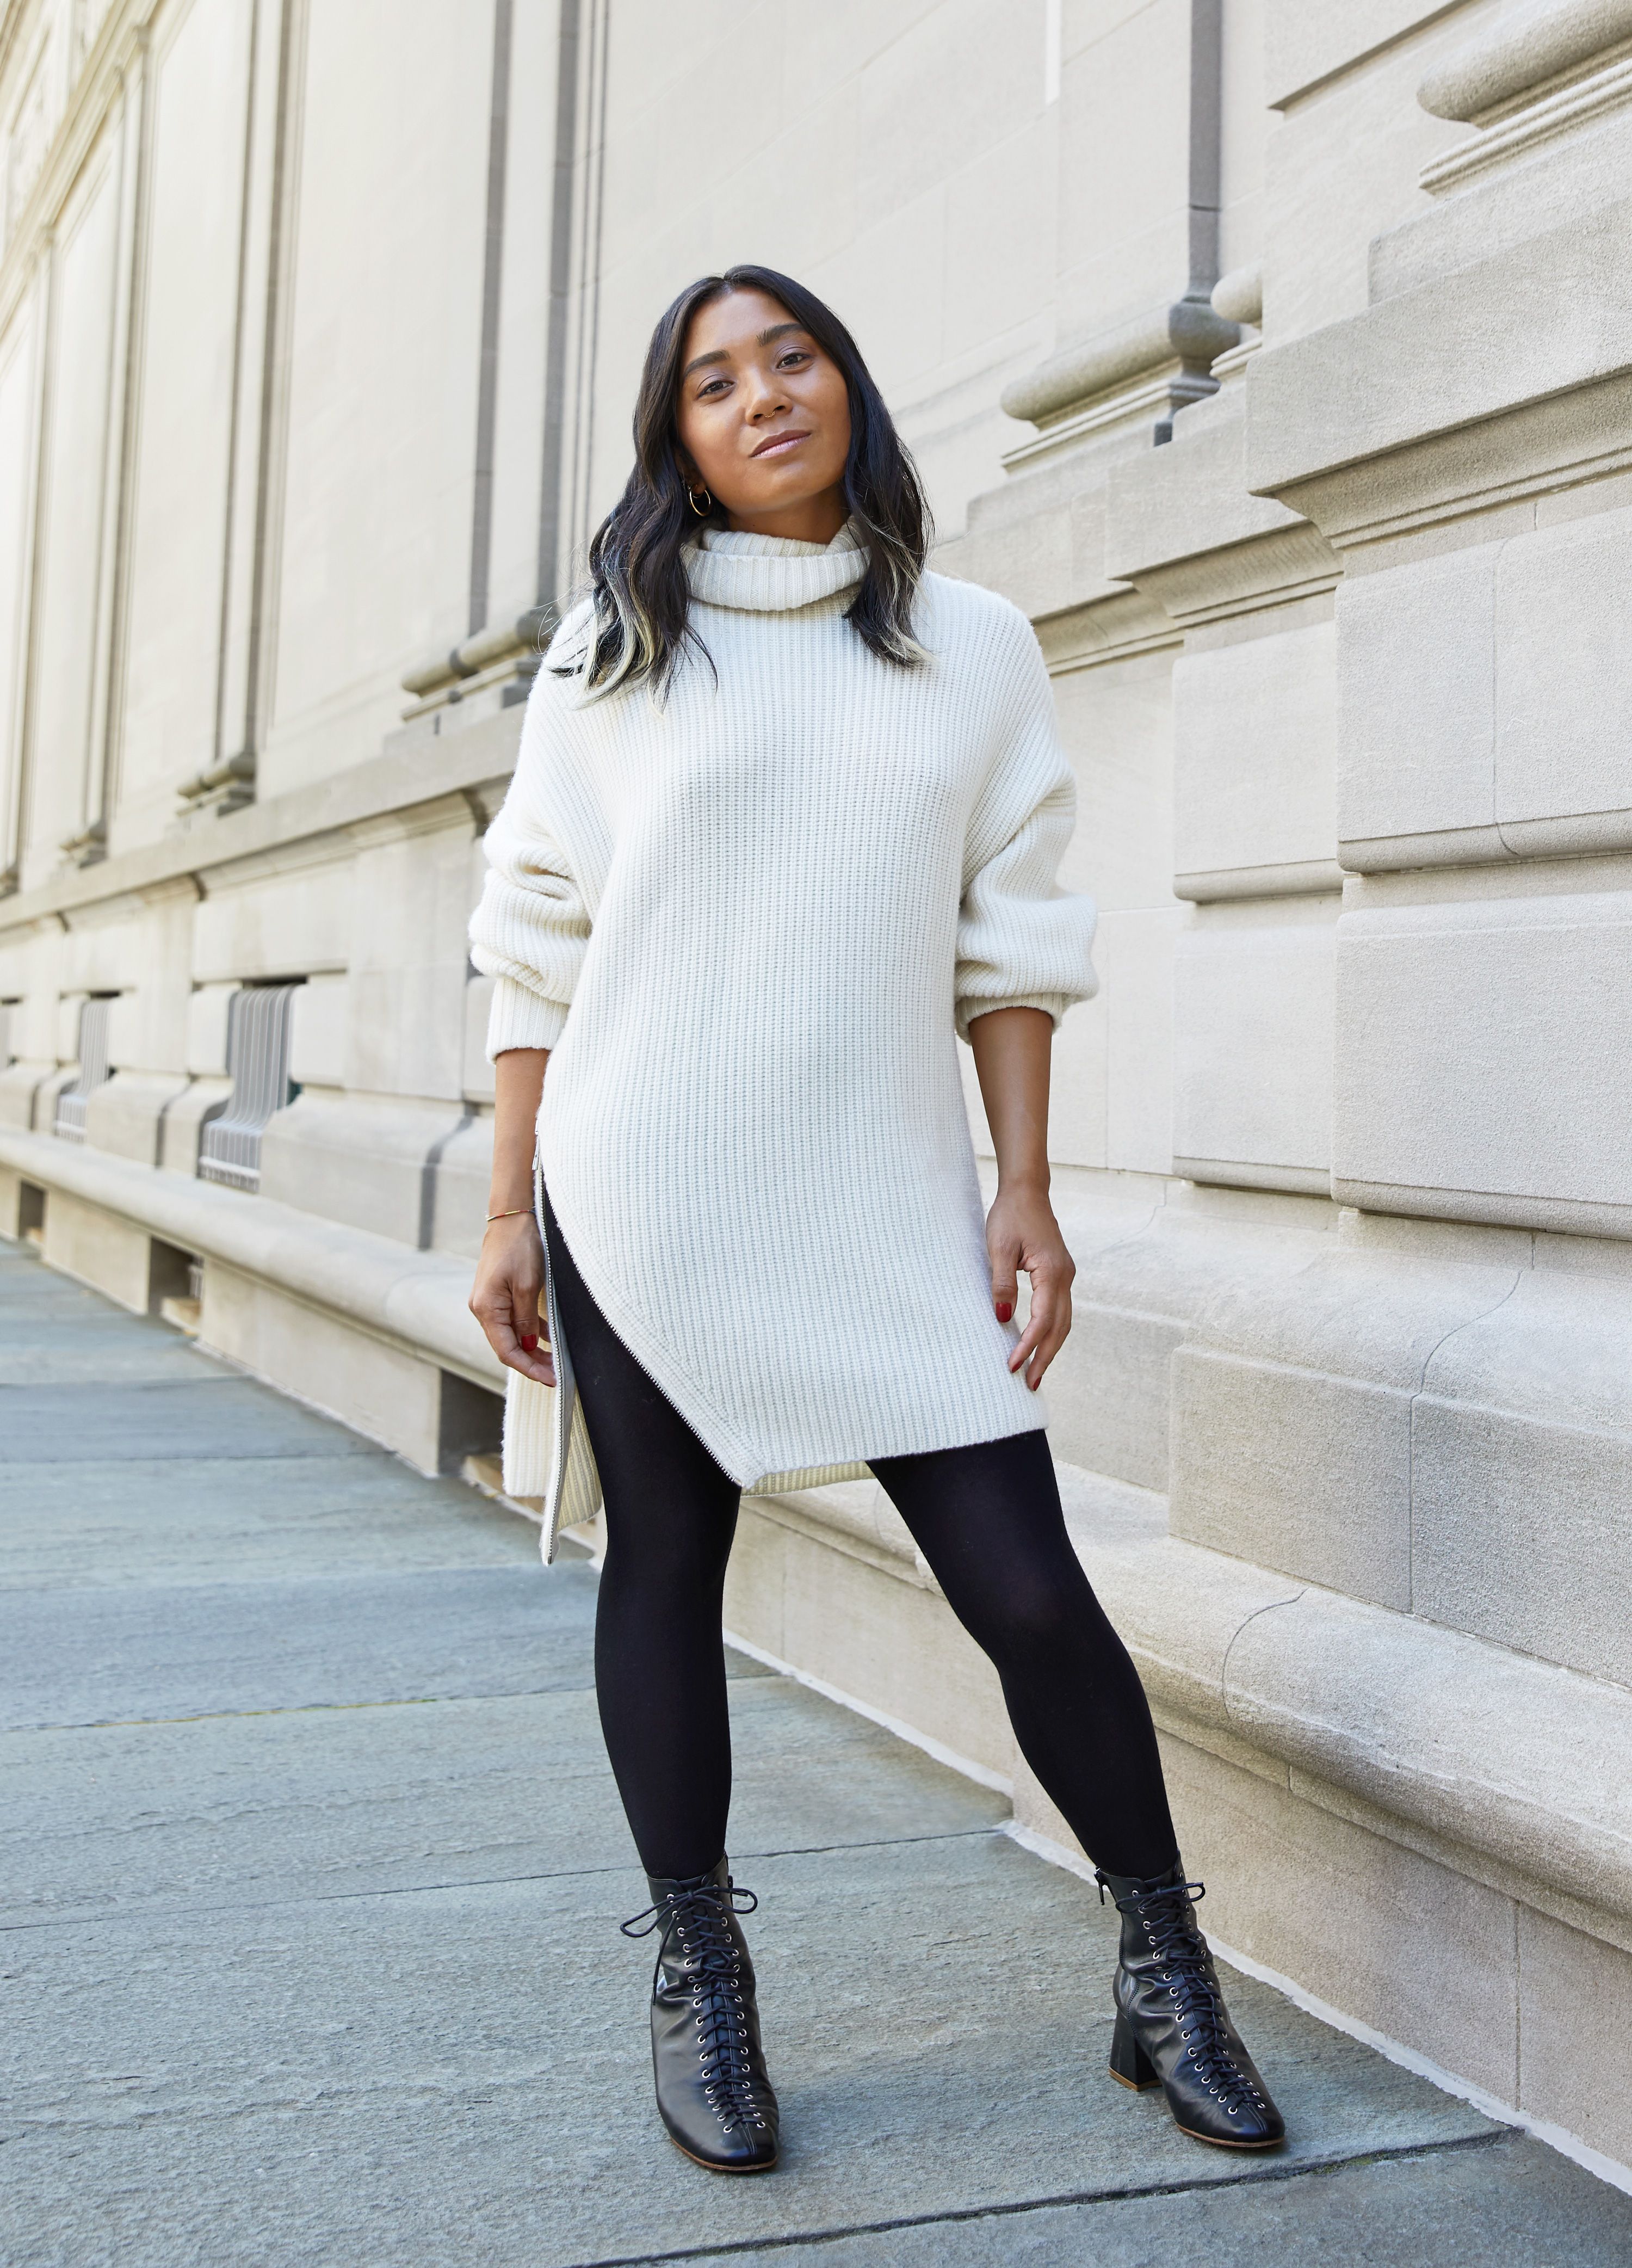 How to Style Tights for Fall Outfits - Calzedonia + ELLE